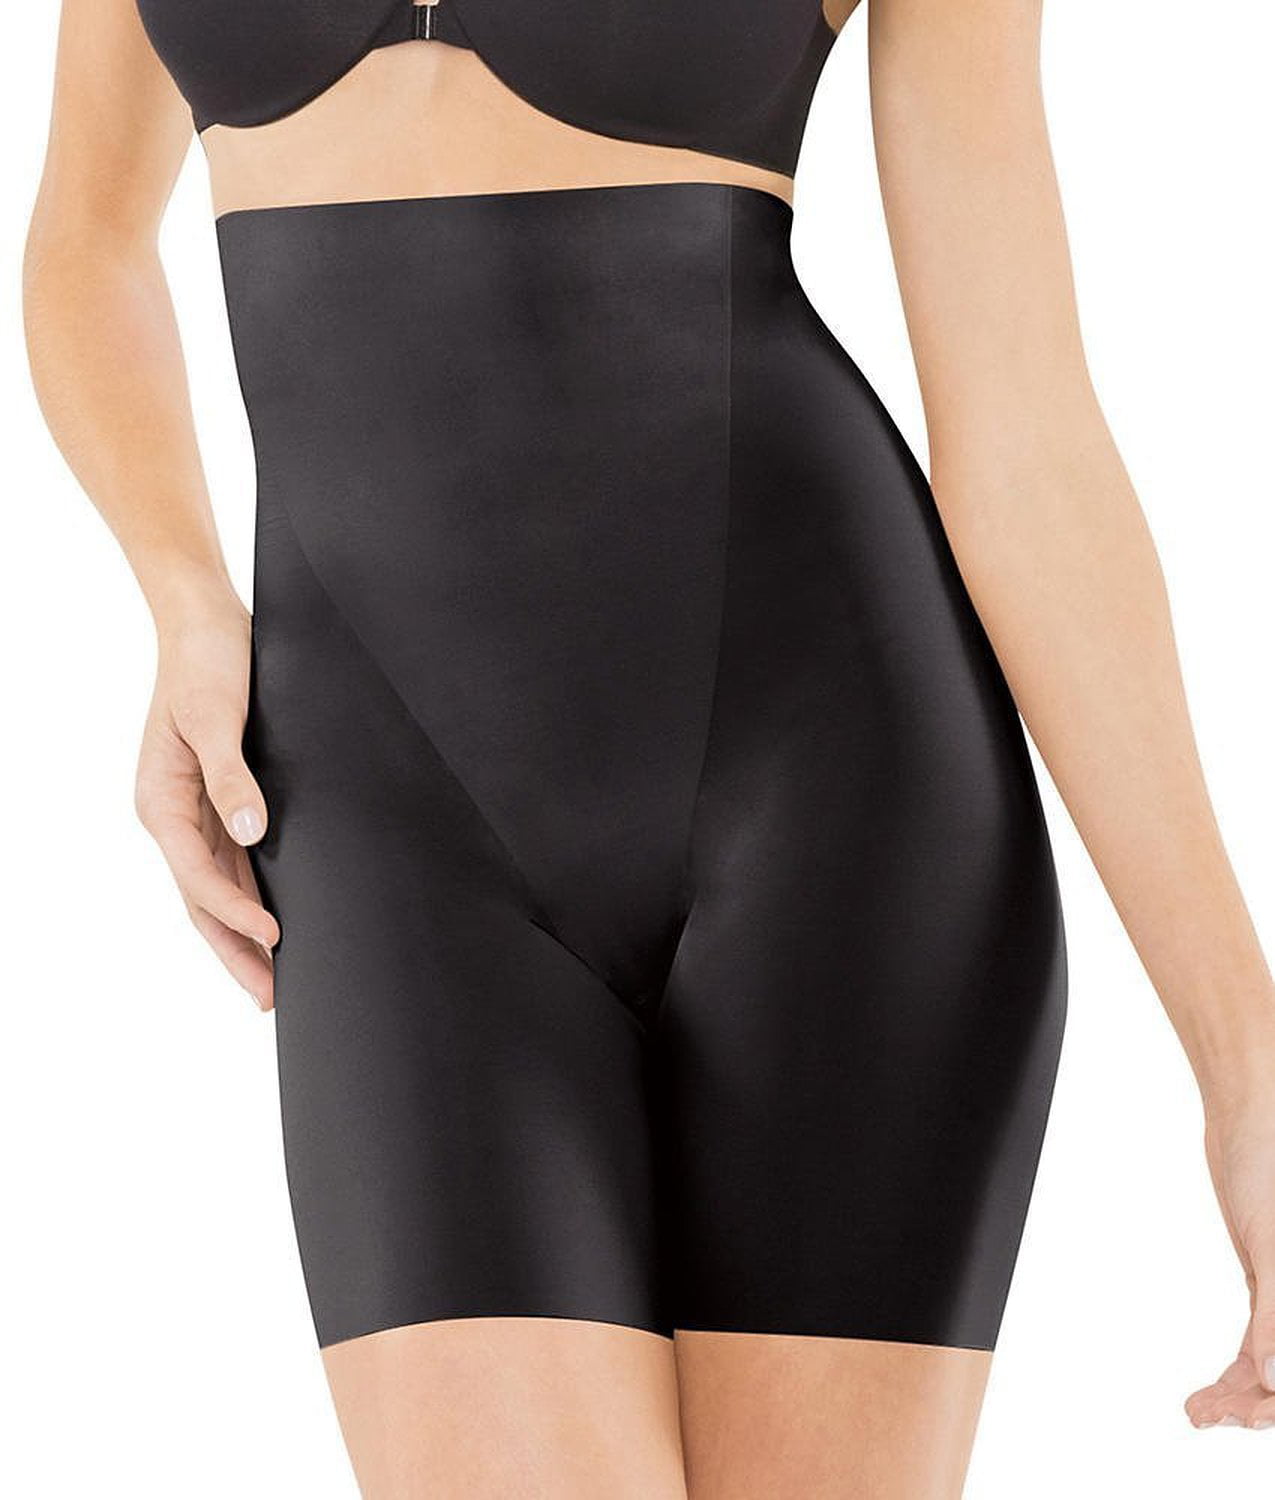 Spanx Shapewear Slimming Shape My Day Super Control Black Or Natural